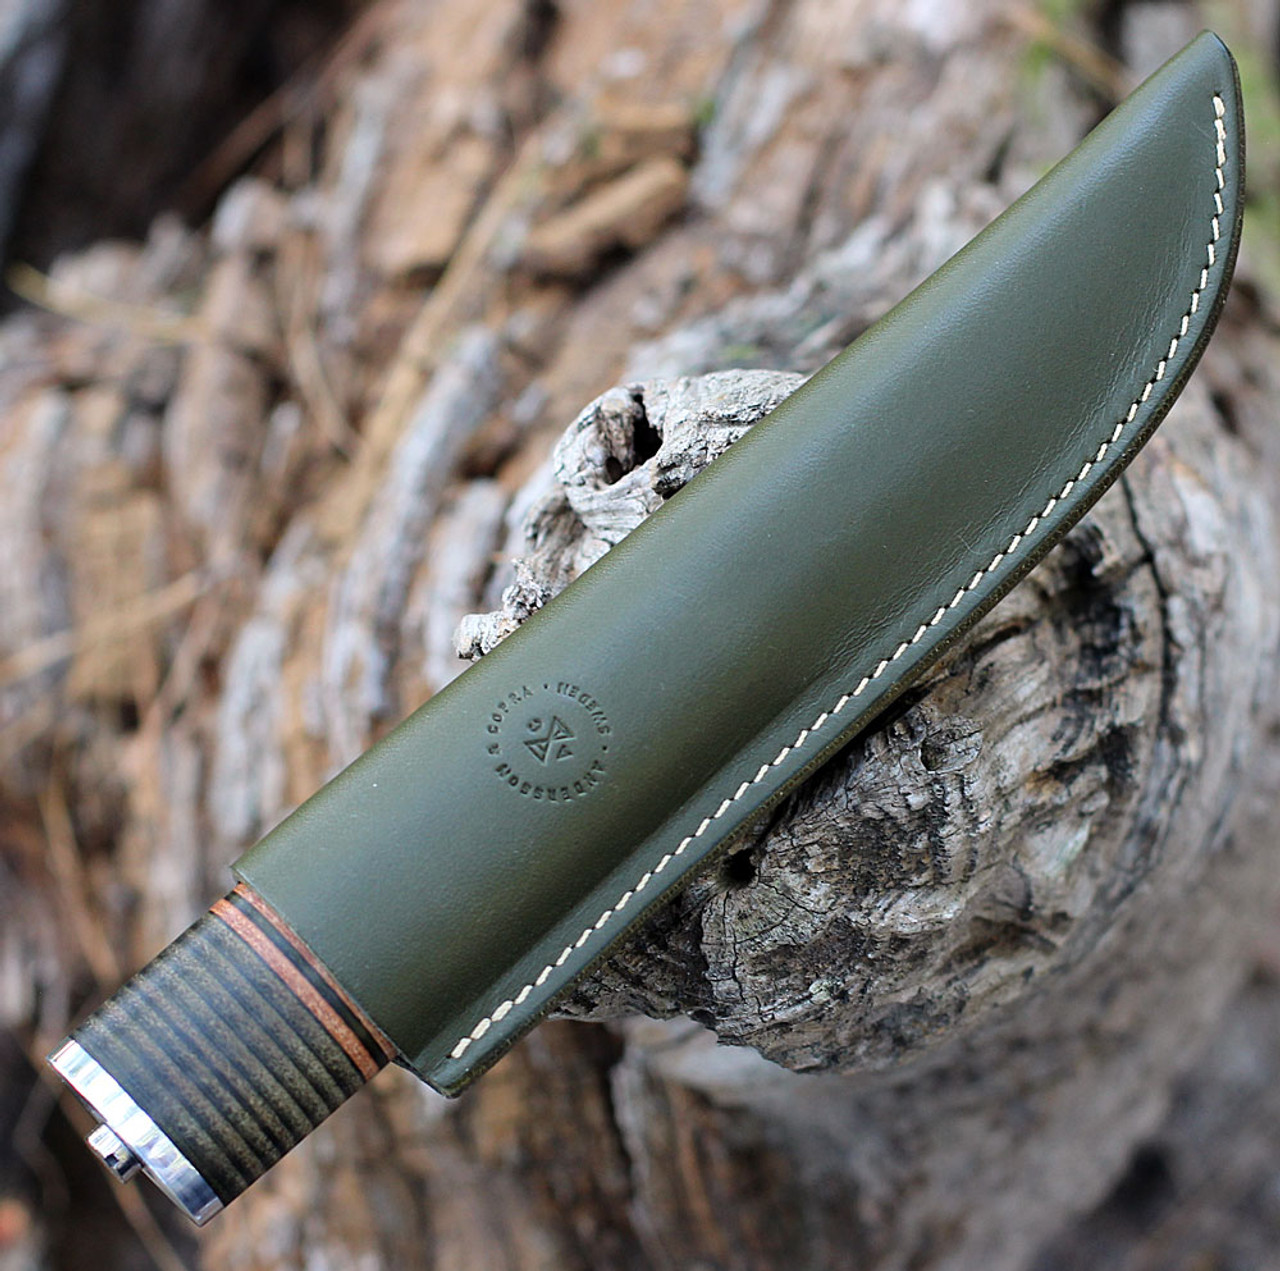 Andersson & Copra Scandinavian Sportsman Fixed Blade Knife Model 2 (ACSS2ST) - 3.54 in AEB-L Steel Plain Blade,  Stacked Leather Handle, Olive Green Leather Sheath